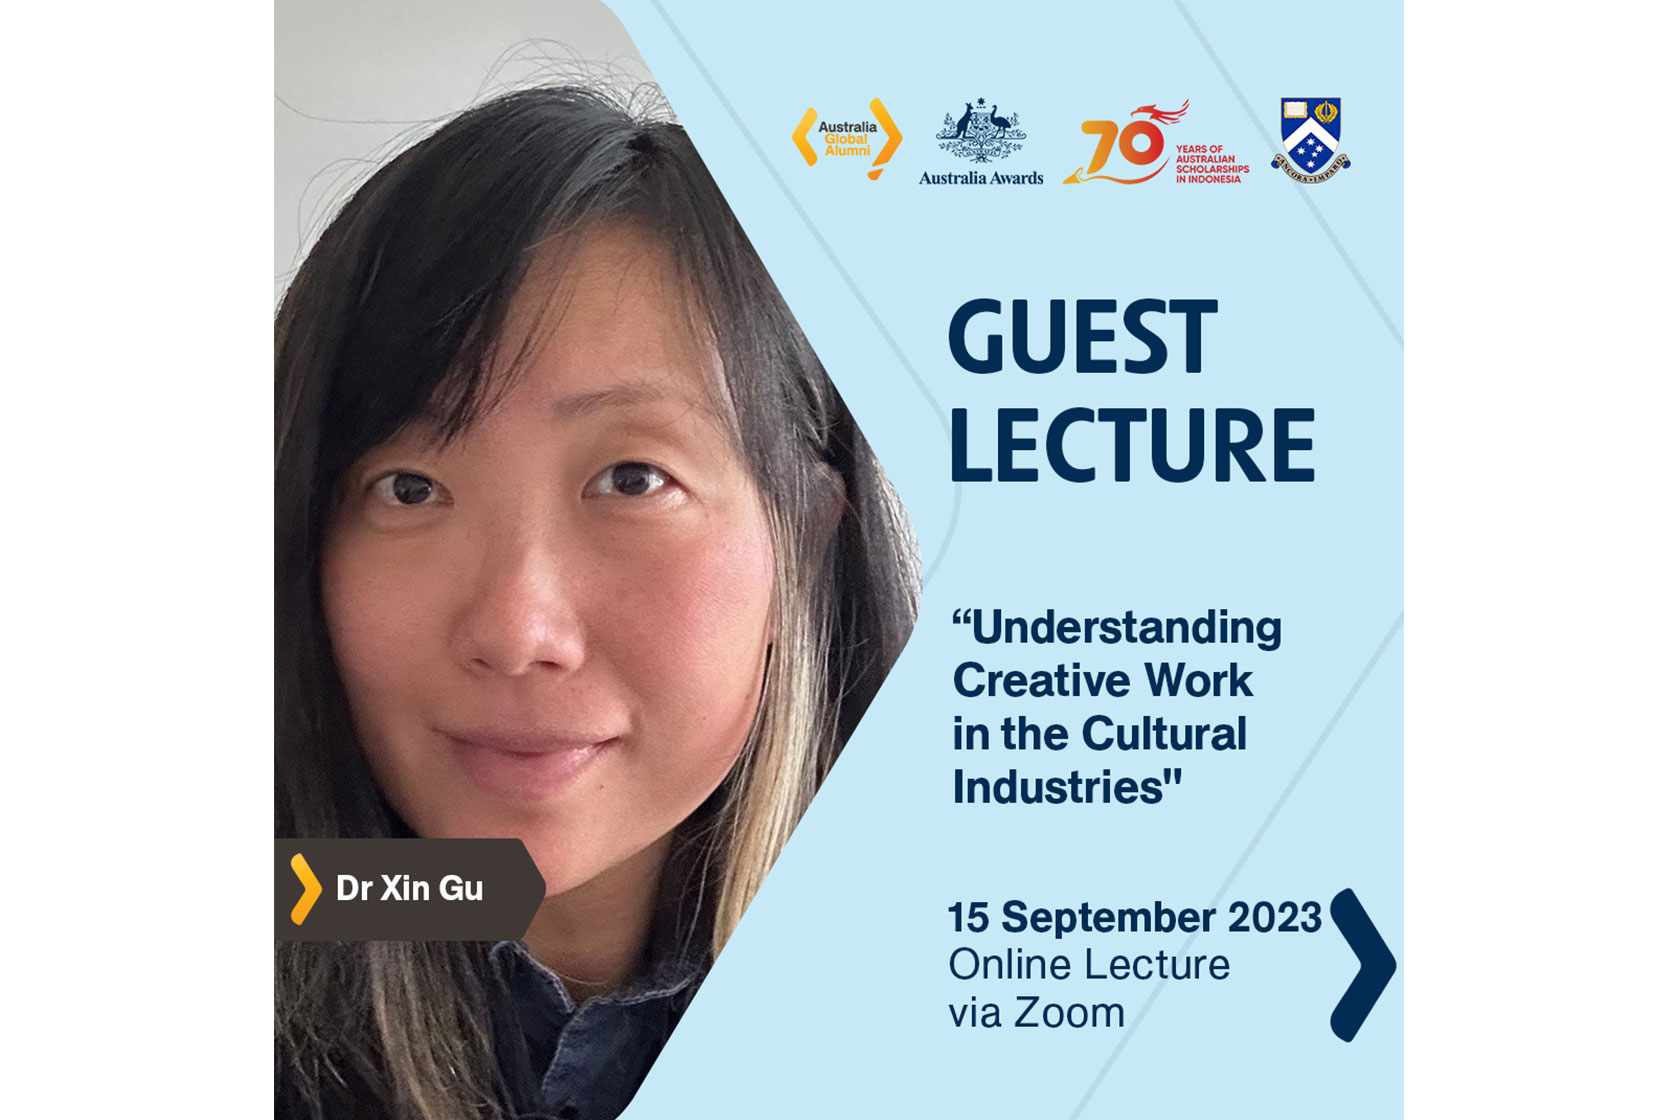 Join Our Lecture Titled “Understanding Creative Work in the Cultural Industries"